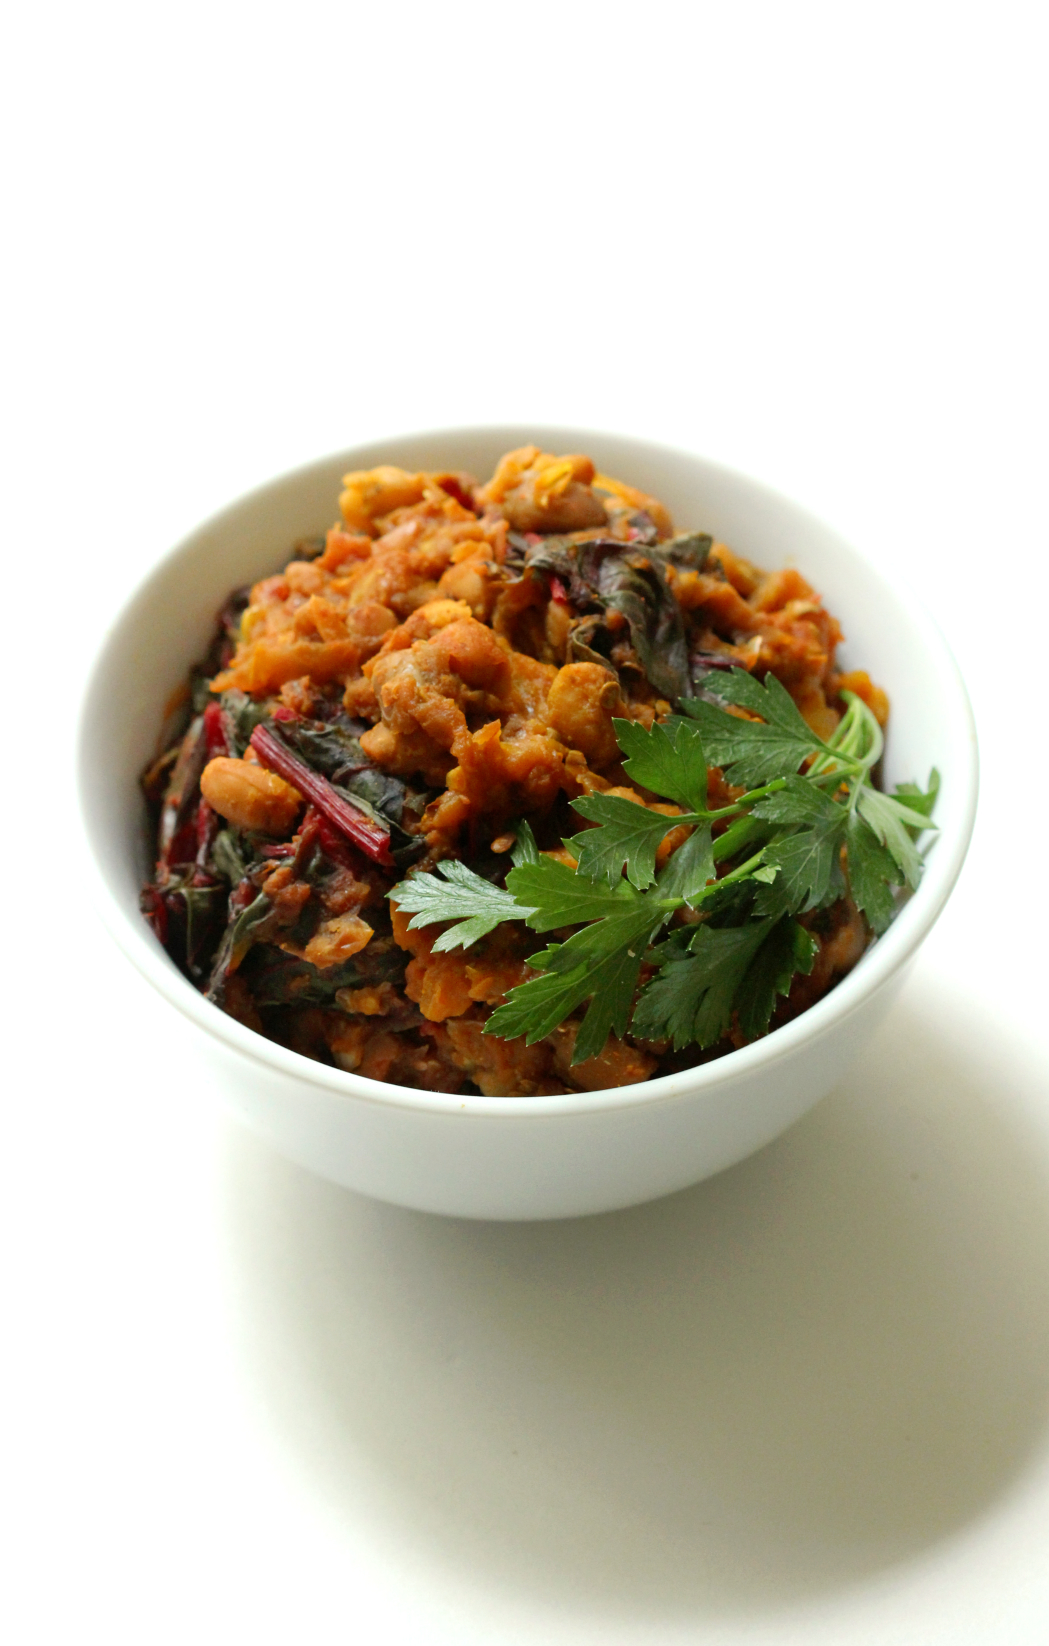 Black Eyed Pea Curry with Swiss Chard & Roasted Eggplant | Strength and Sunshine @RebeccaGF666 An easy quick curry for a warming meal any night of the week. Black Eyed Pea Curry with Swiss Chard & Roasted Eggplant is packed with creamy veggie power to satisfy even this biggest plant-based skeptic! A perfect gluten-free, vegan, meatless dinner recipe.